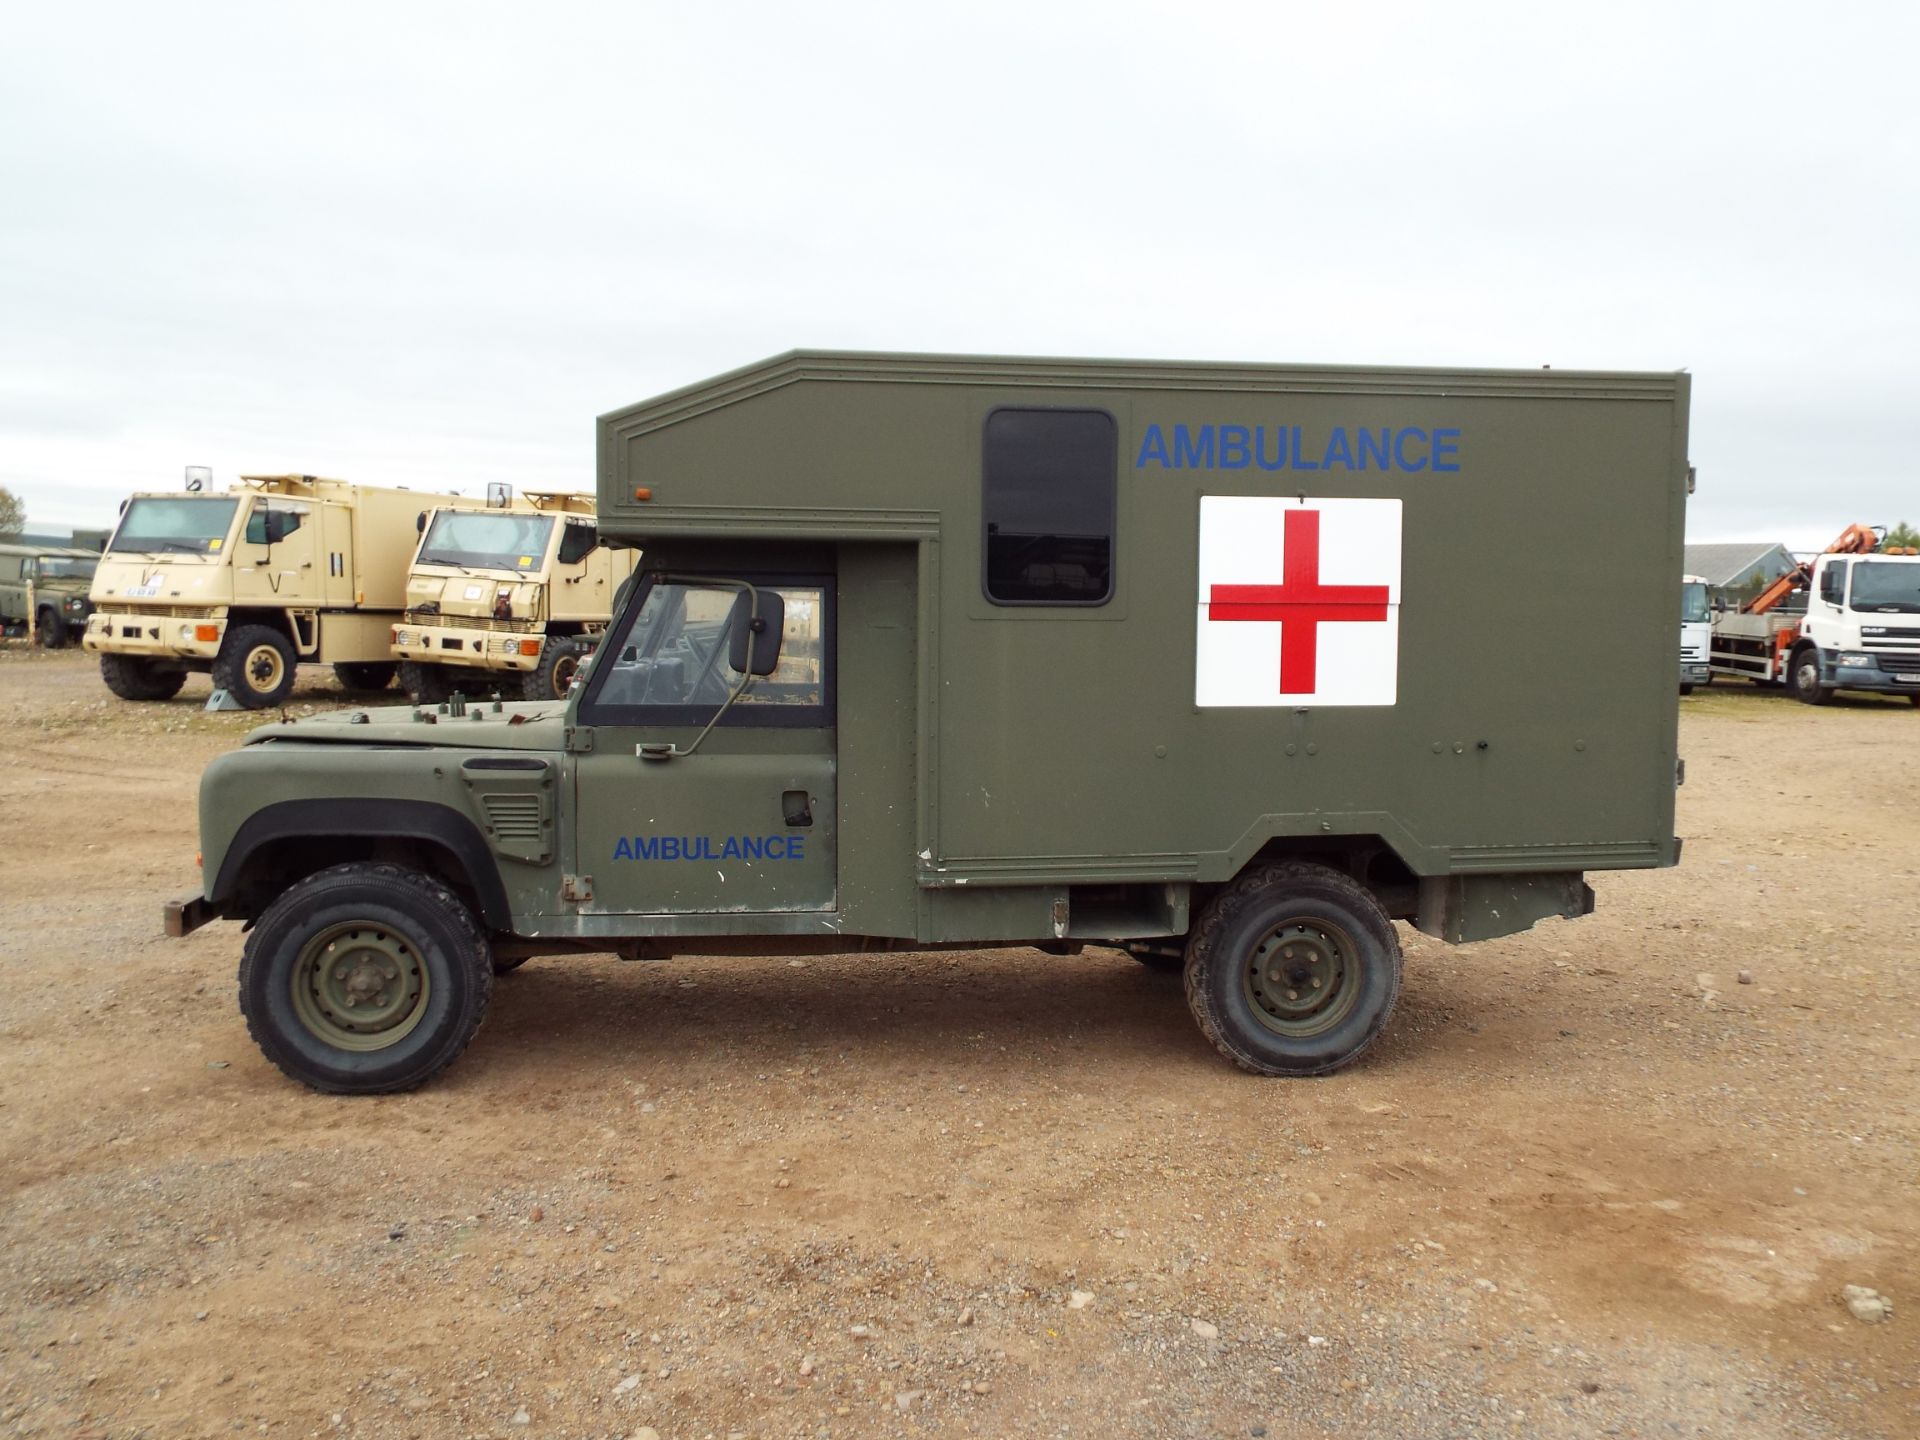 Military Specification Land Rover Wolf 130 ambulance - Image 4 of 28